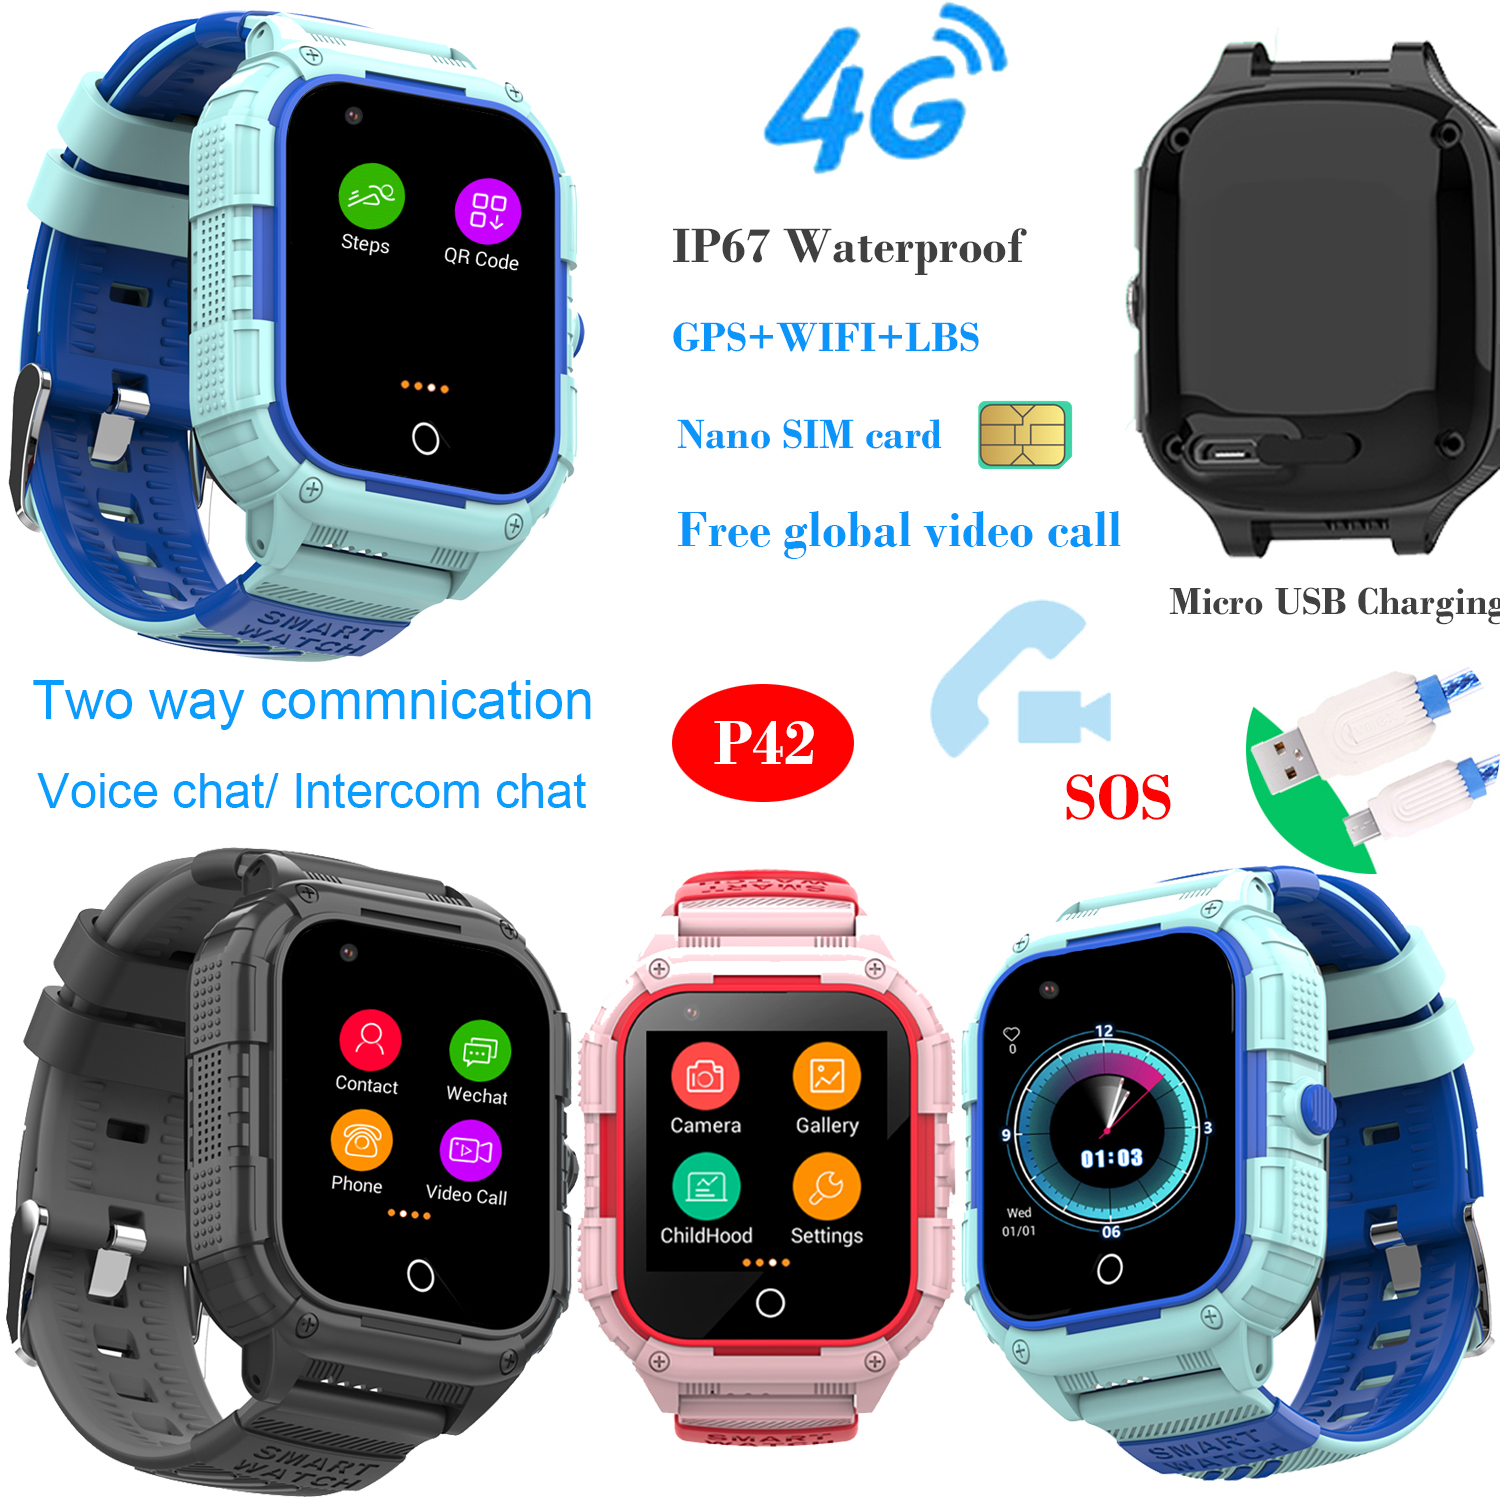 New Developed IP67 Waterproof LTE Students Personal GPS Tracker Watch with Geo-fence Panic Button Video call for Security Monitor P42